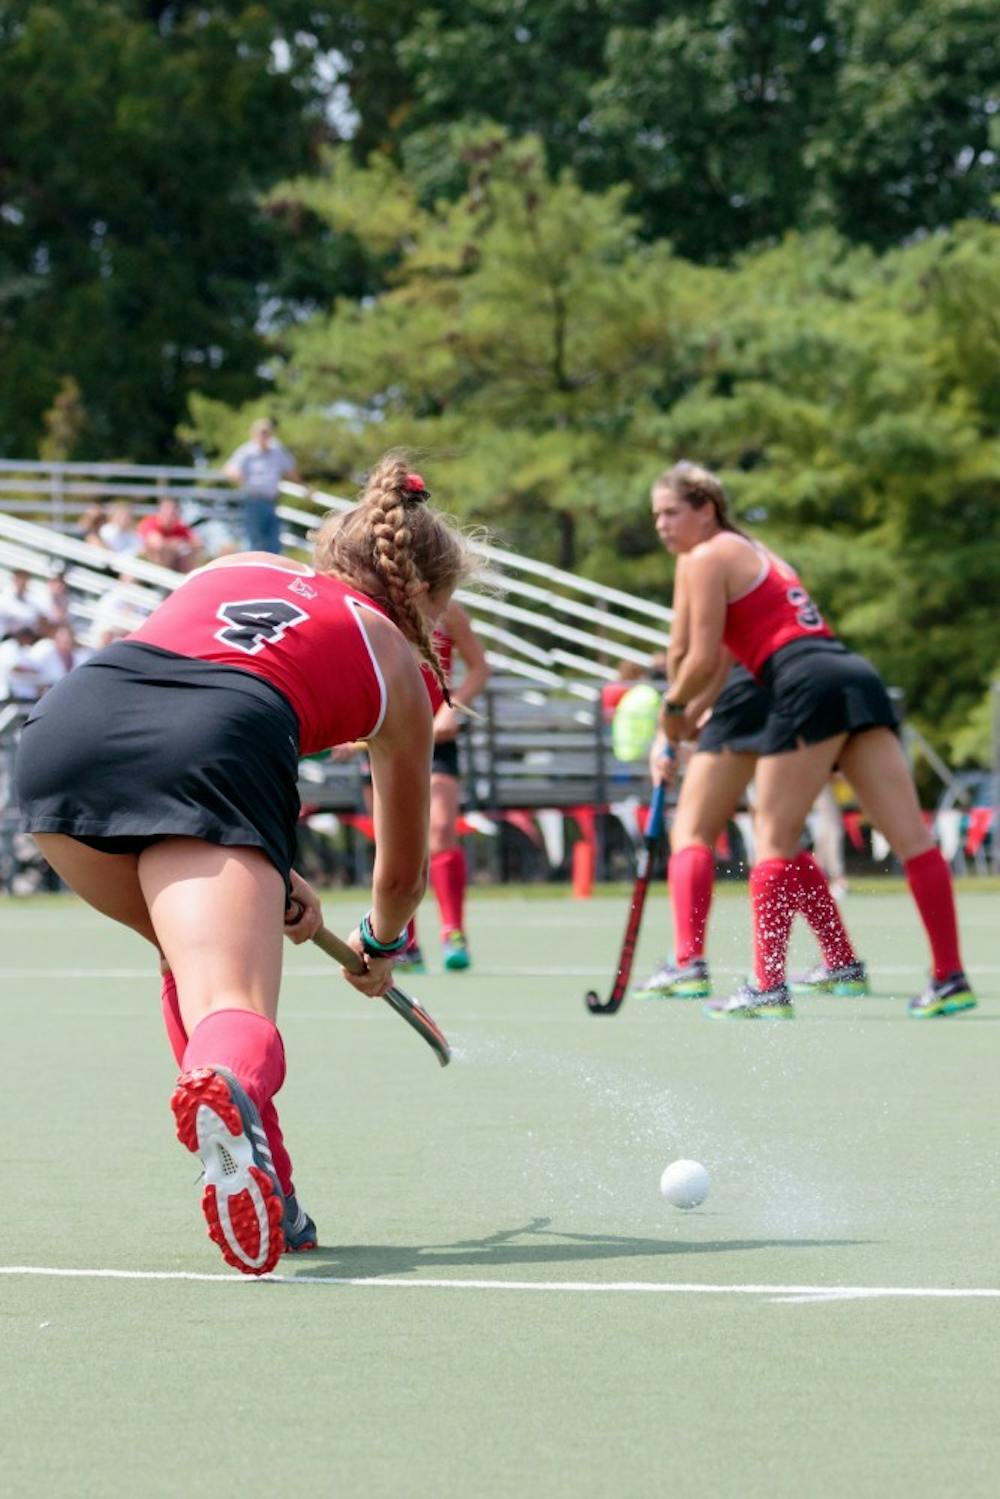 <p>Forward Michelle Shampton launches the ball for a penalty shot during the game against St. Louis Aug. 25, 2017, at the Briner Sports Complex. The Cardinals won 5-0. Kyle Crawford // DN</p>